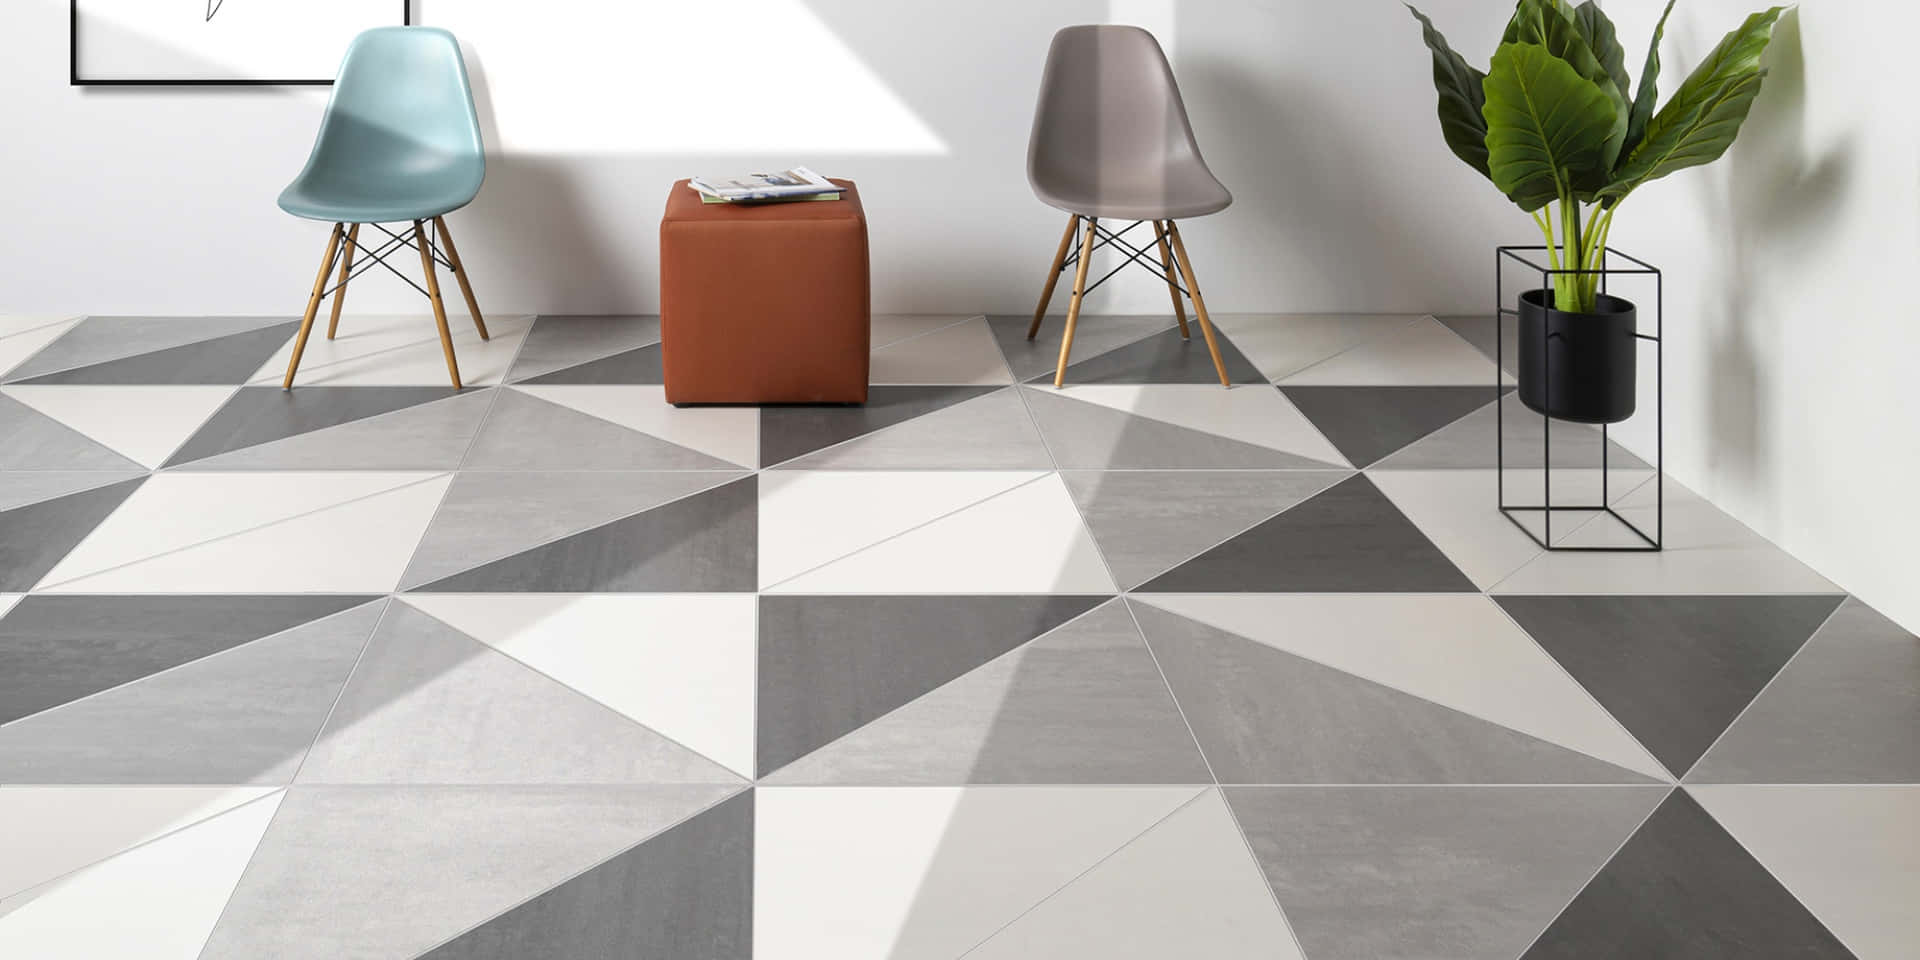 Transform your floors and walls with easy-to-install tile